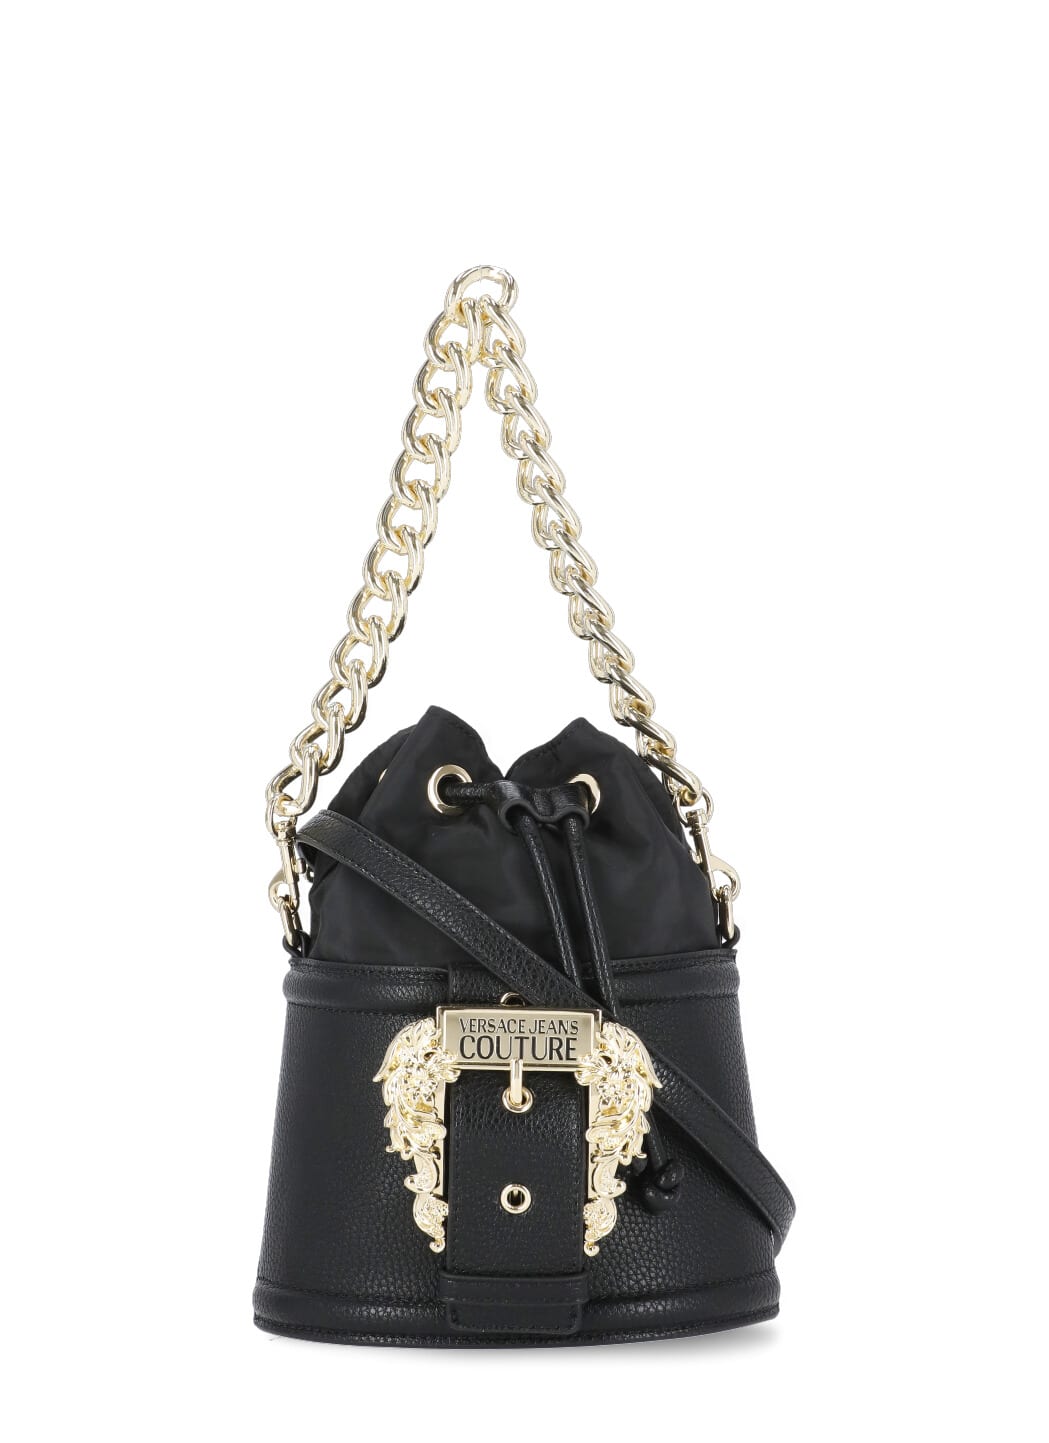 Versace Jeans Couture Handbag With Baroque Buckle In Black